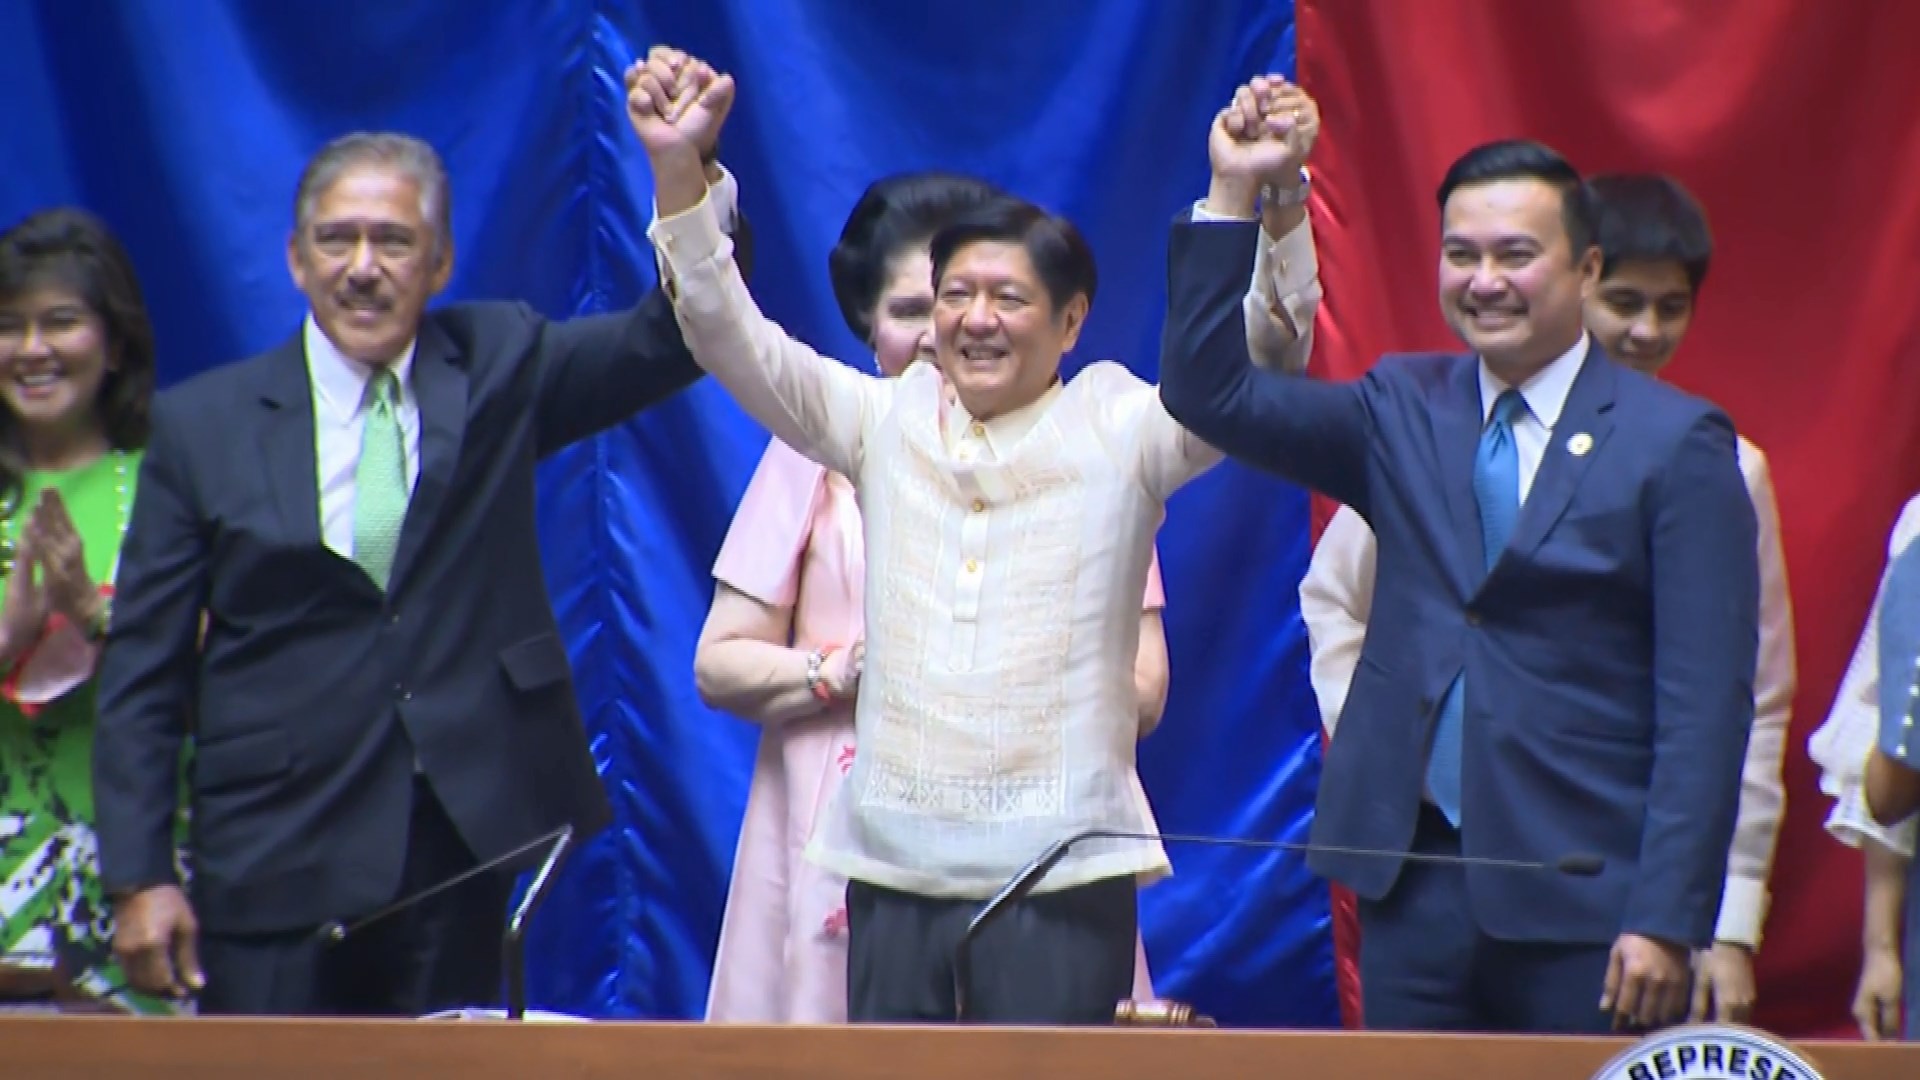 President elect Ferdinand Marcos Jr will be inaugurated as 17th president of the Philippines